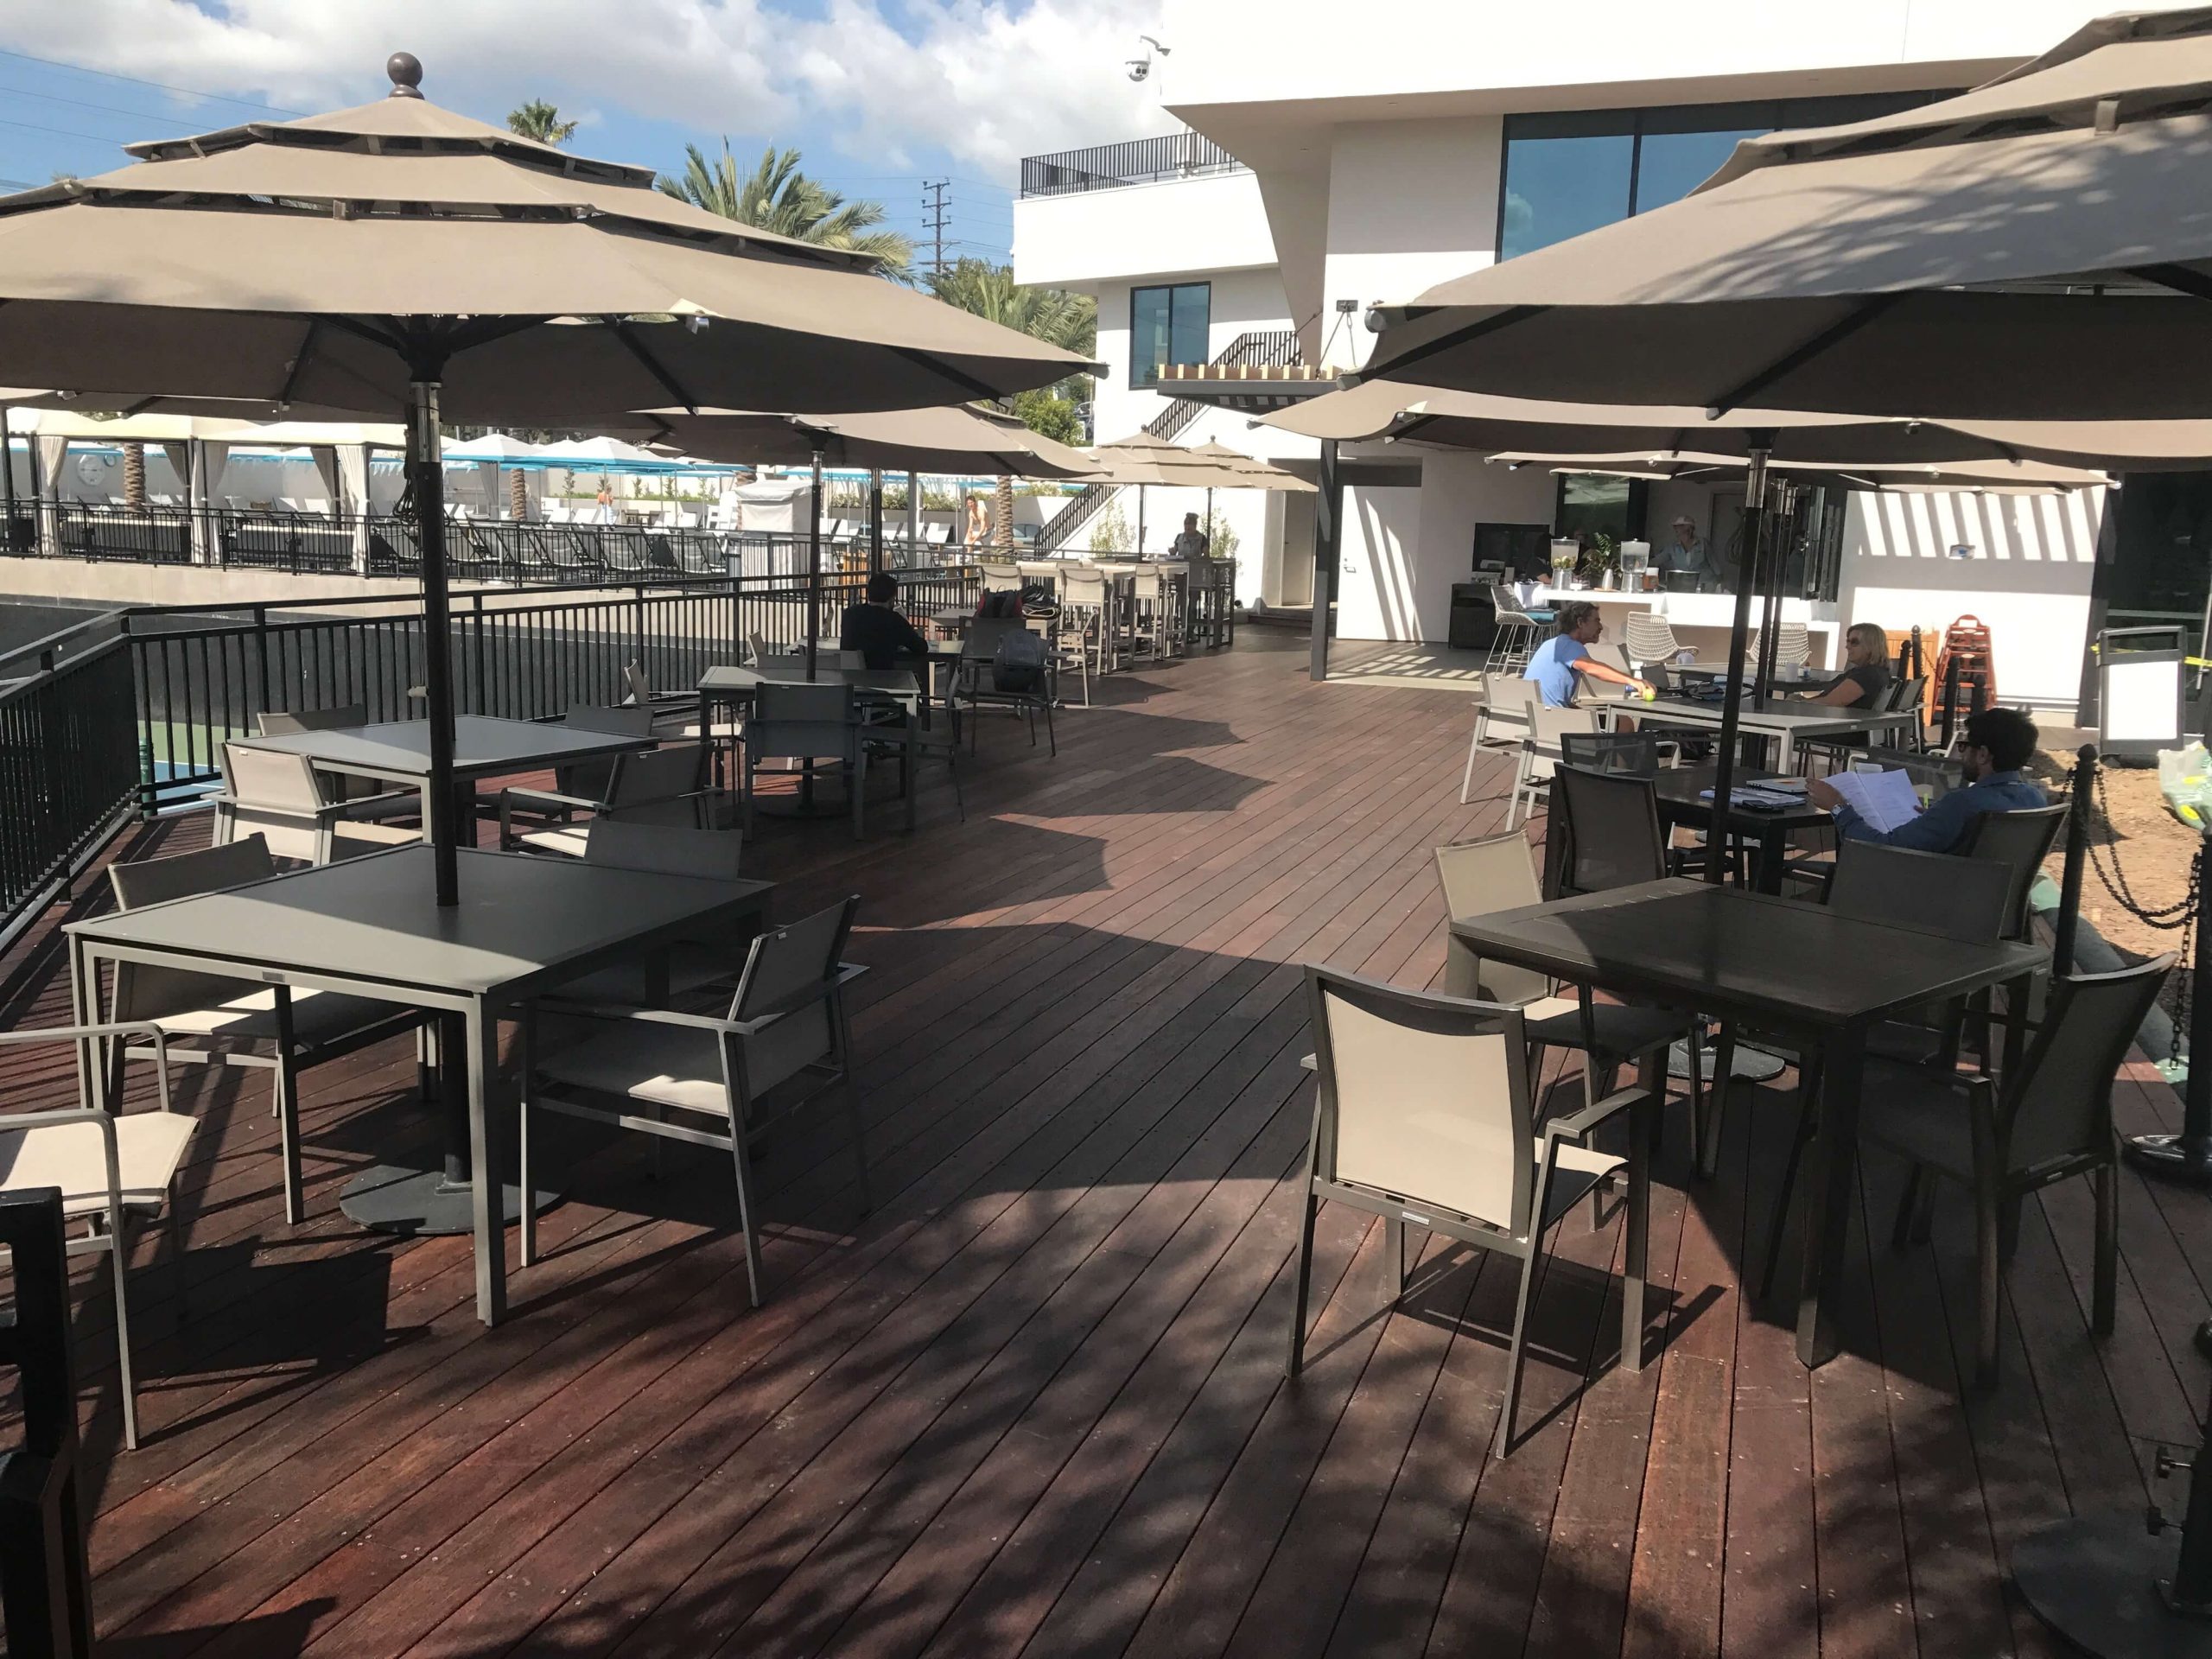 Commercial Decking and Outdoor Lounge Area